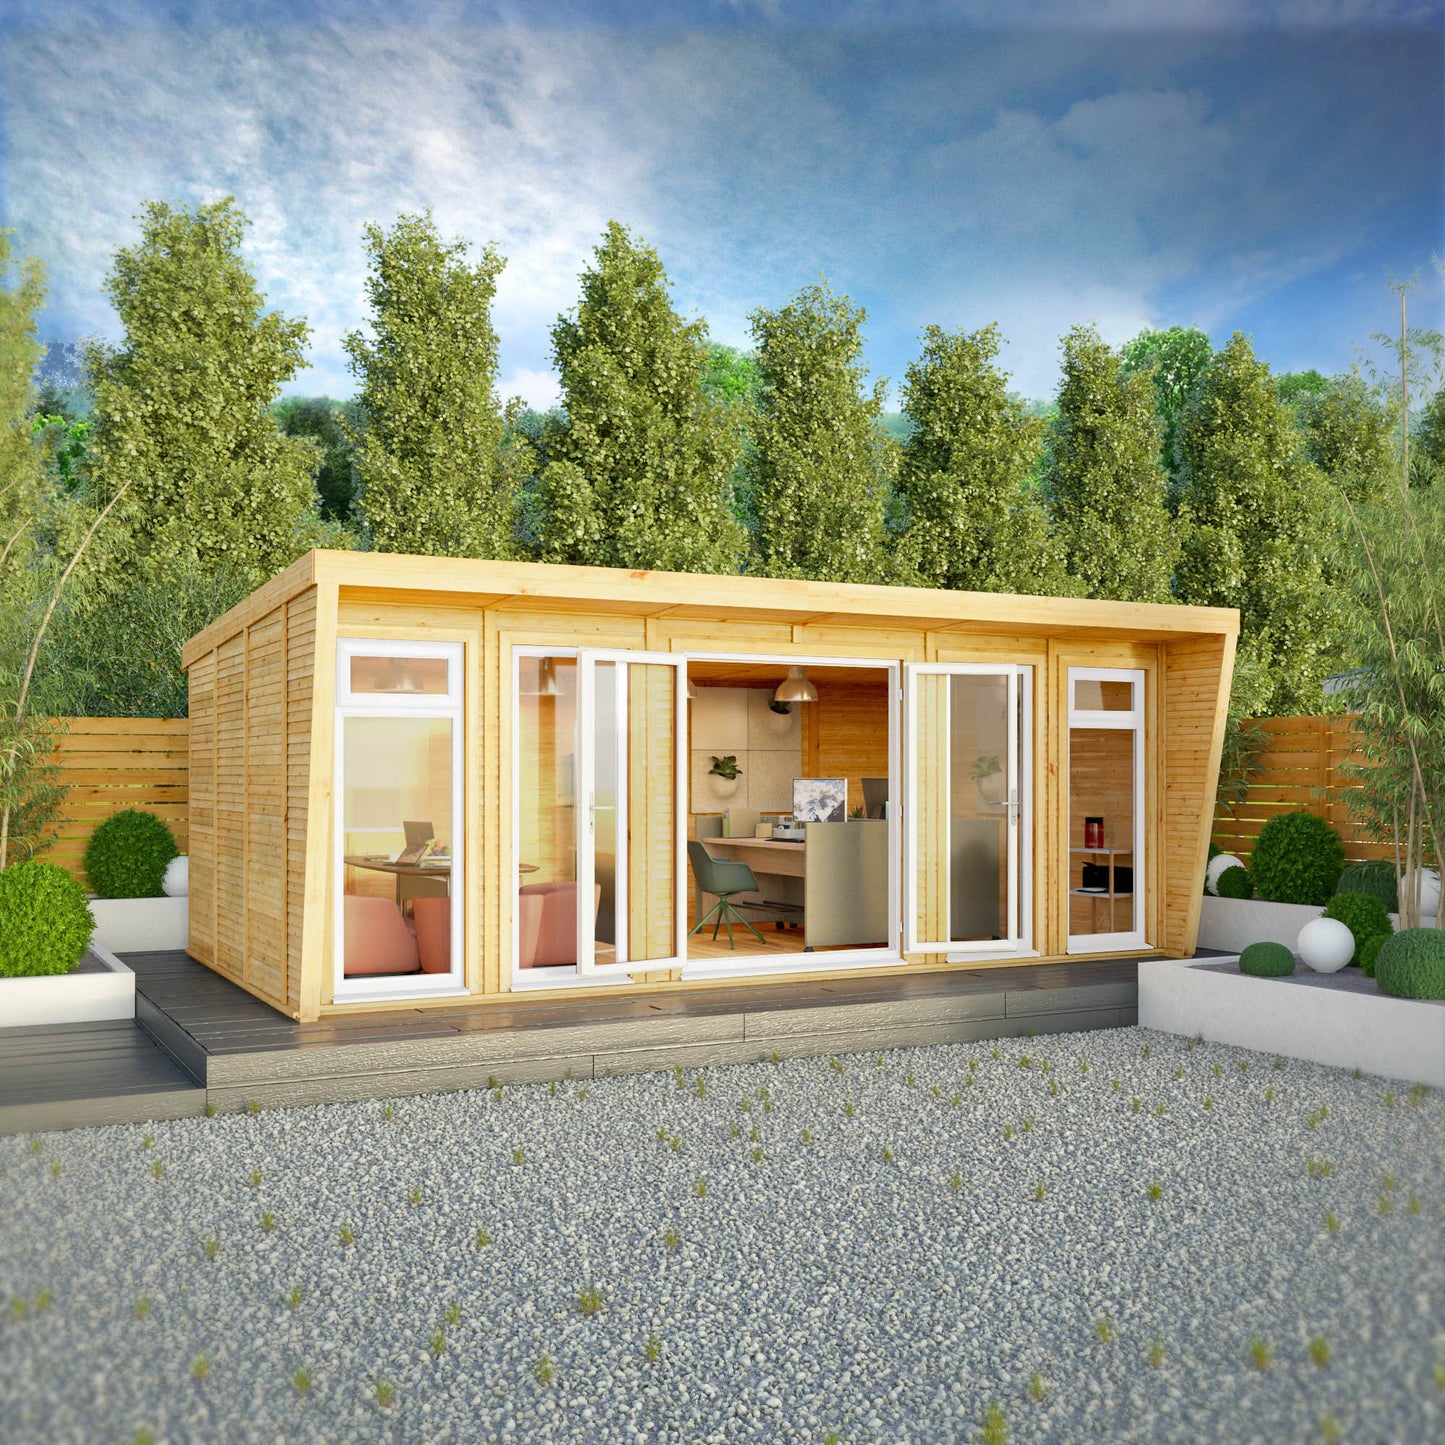 The Harlow 6m x 3m Premium Insulated Garden Room with White UPVC